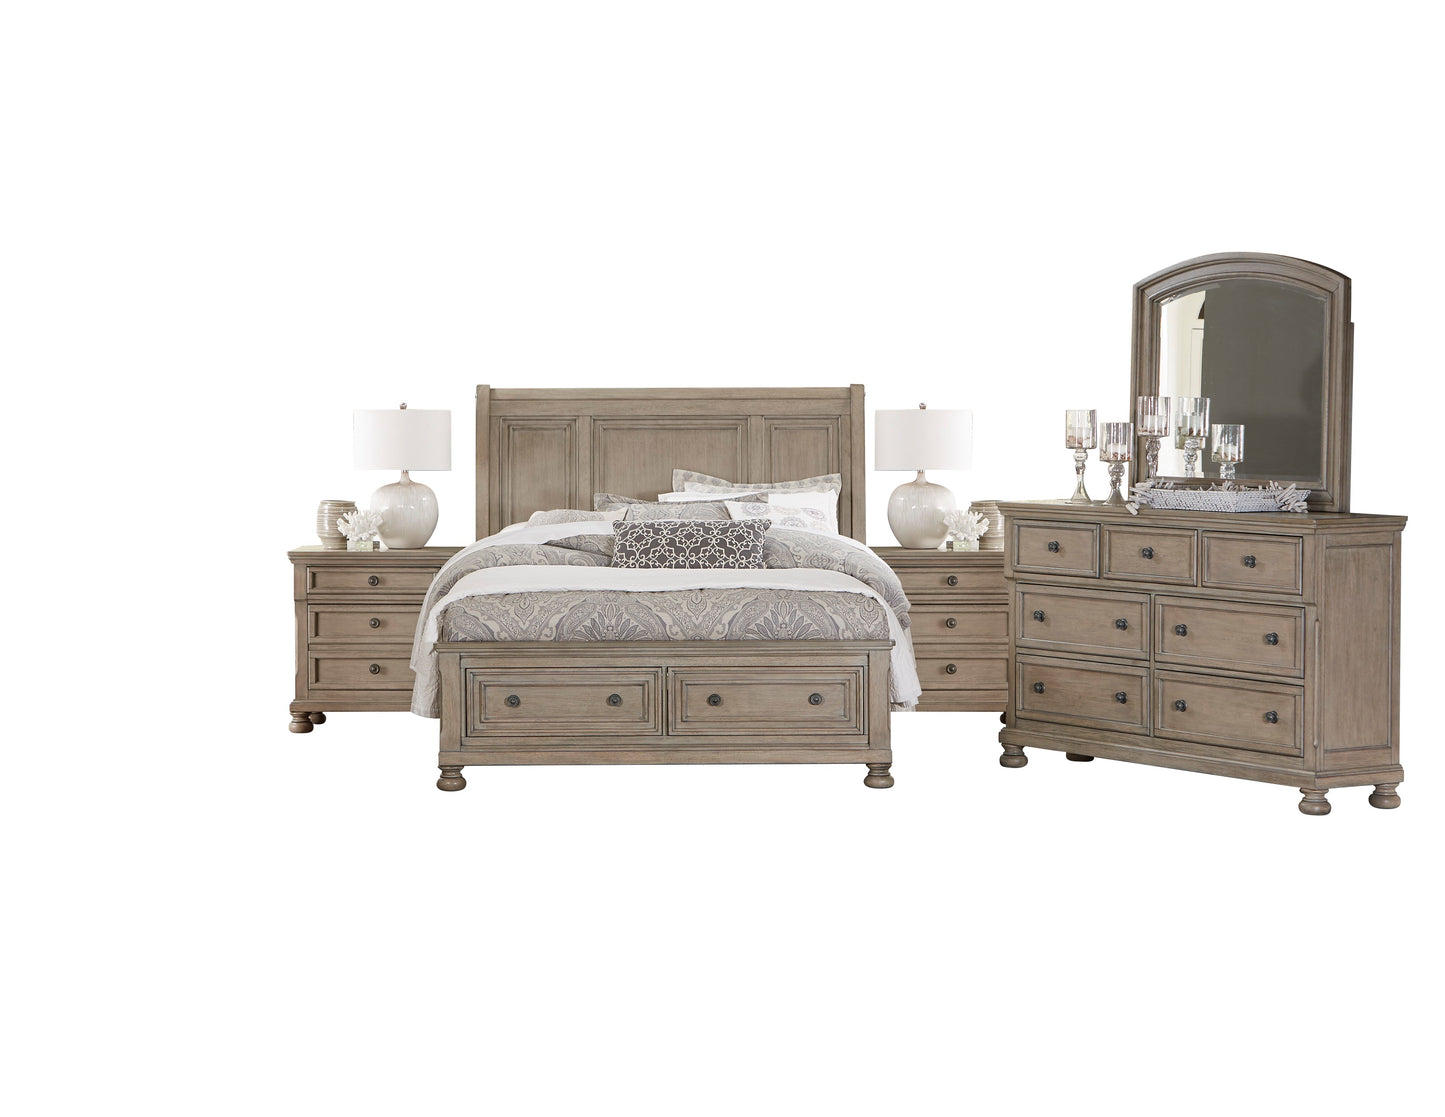 Broville Rustic 5PC Bedroom Set E King Sleigh Storage Bed, Dresser, Mirror, 2 Nightstand in Weathered Wood